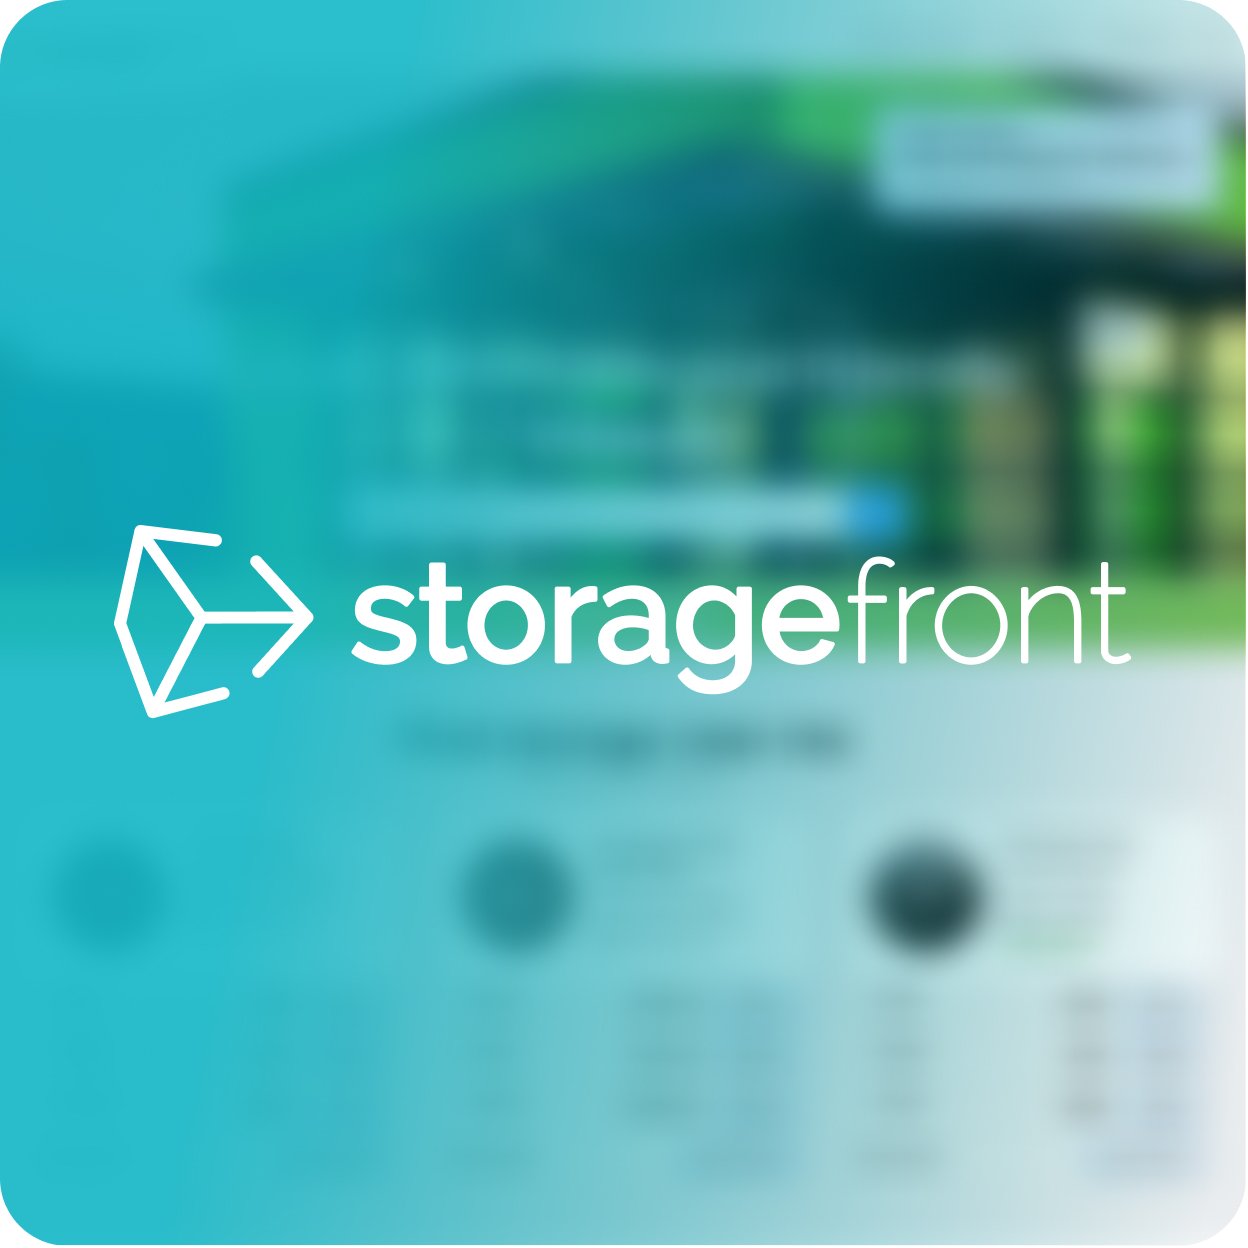 StorageFront - Top of Fold